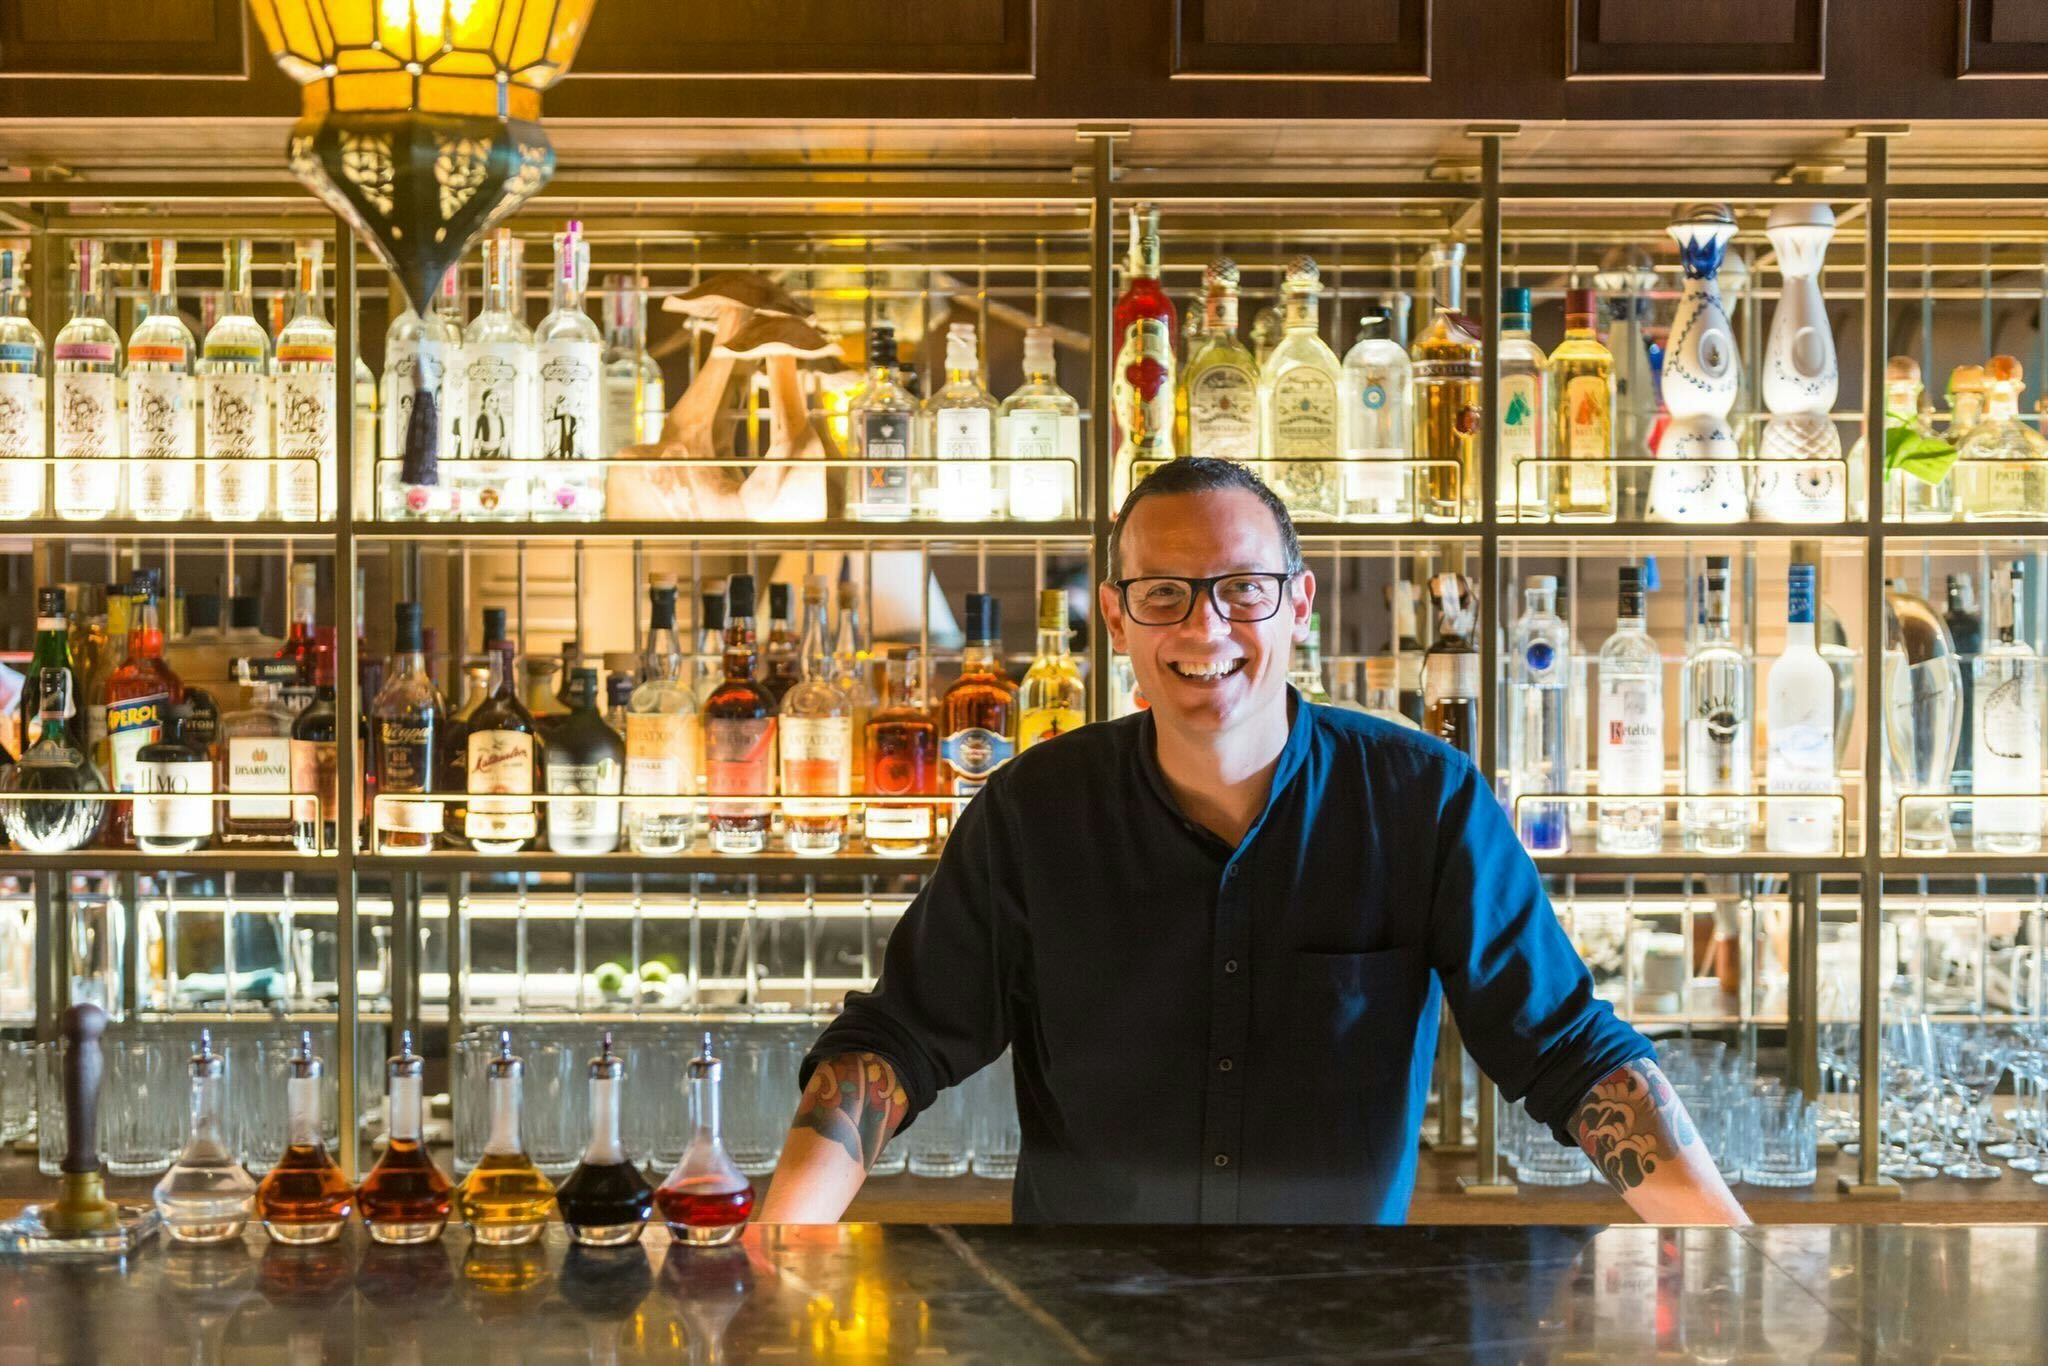 A Day In the Life of a Sober Bartender